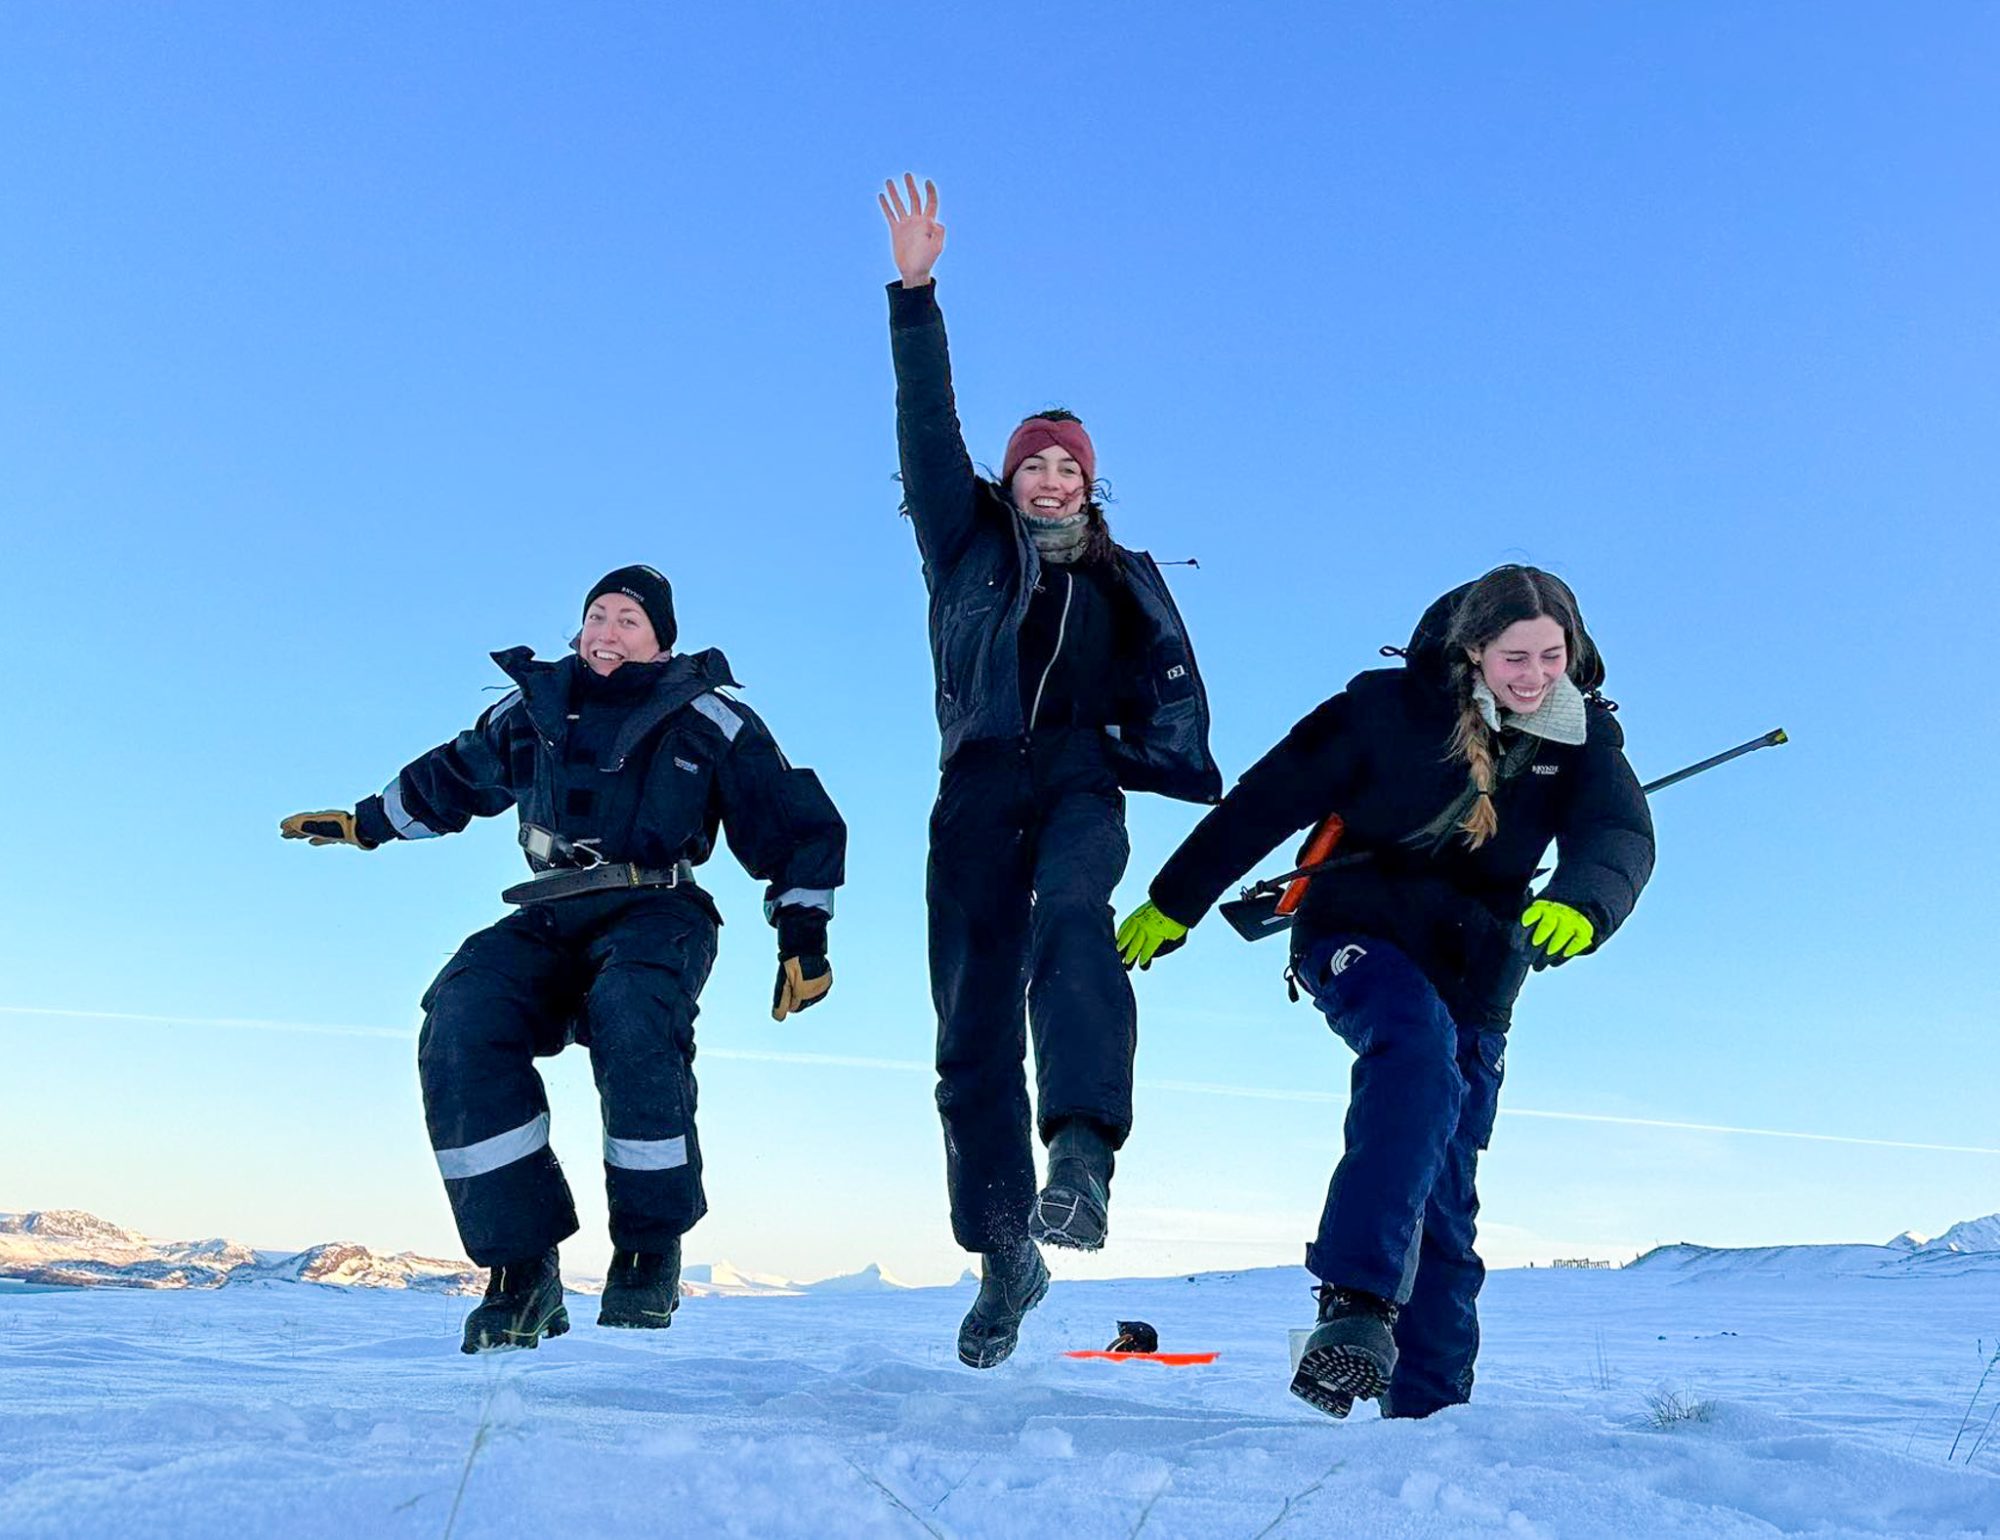 Snow sampling brings institutions together in Ny-Ålesund Research ...